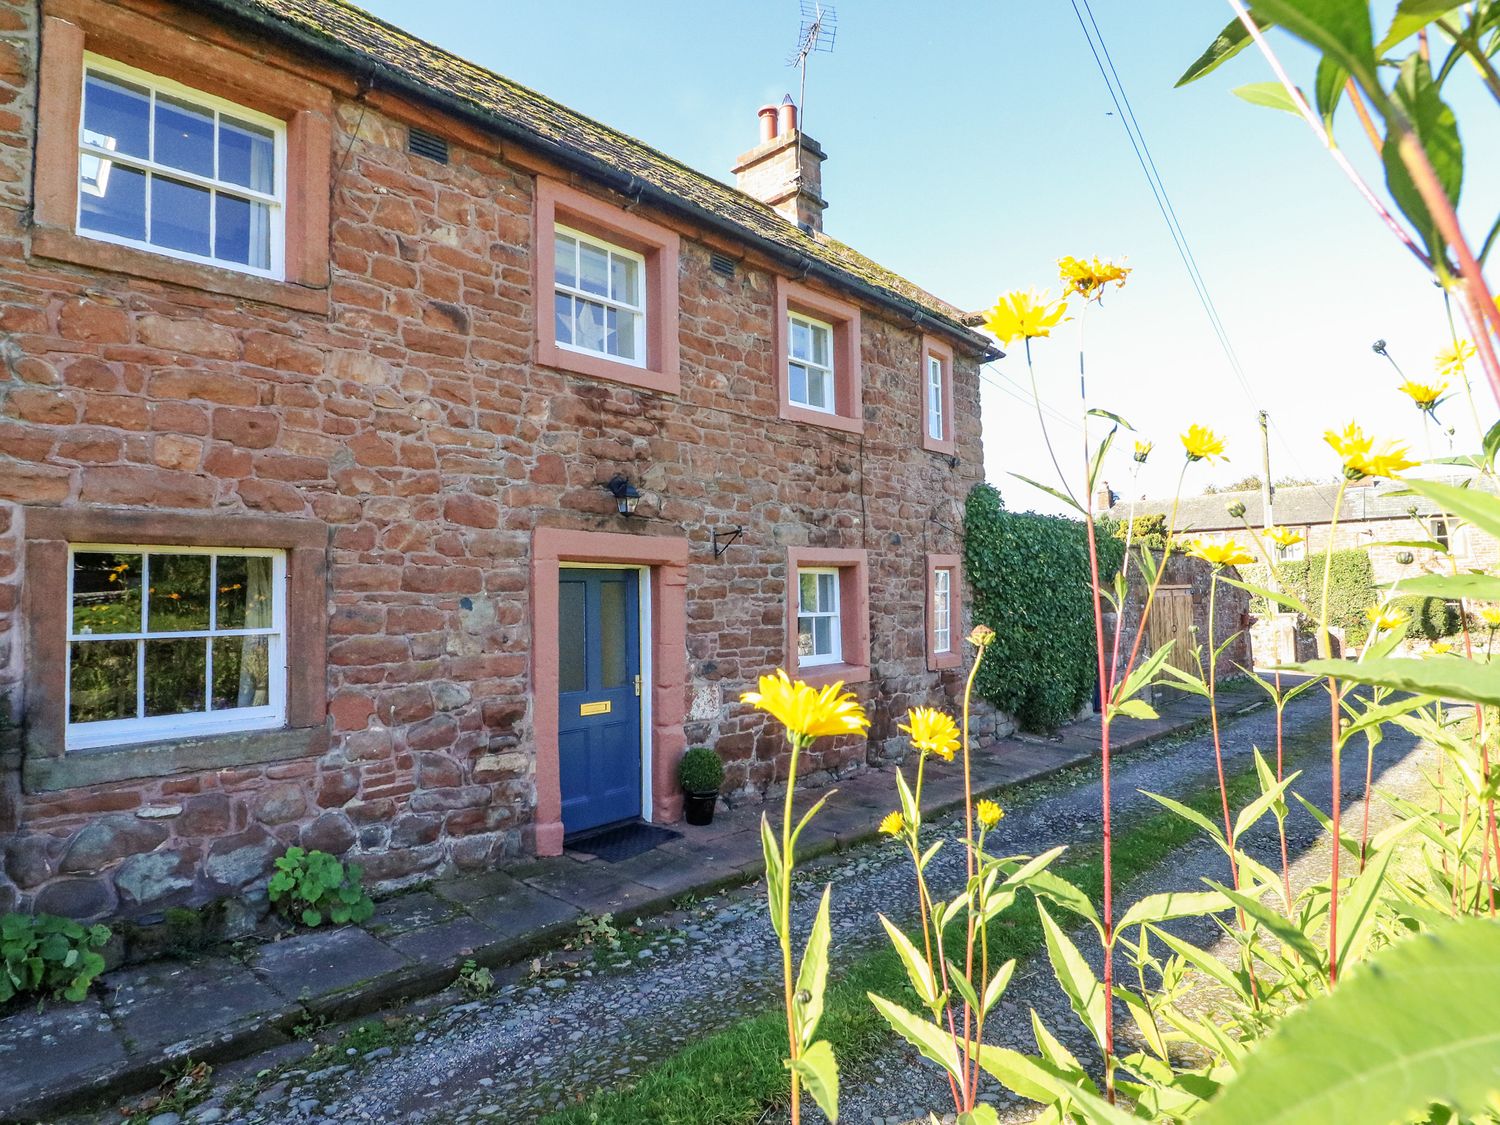 2 Ivy Cottages - Lake District - 1116090 - photo 1